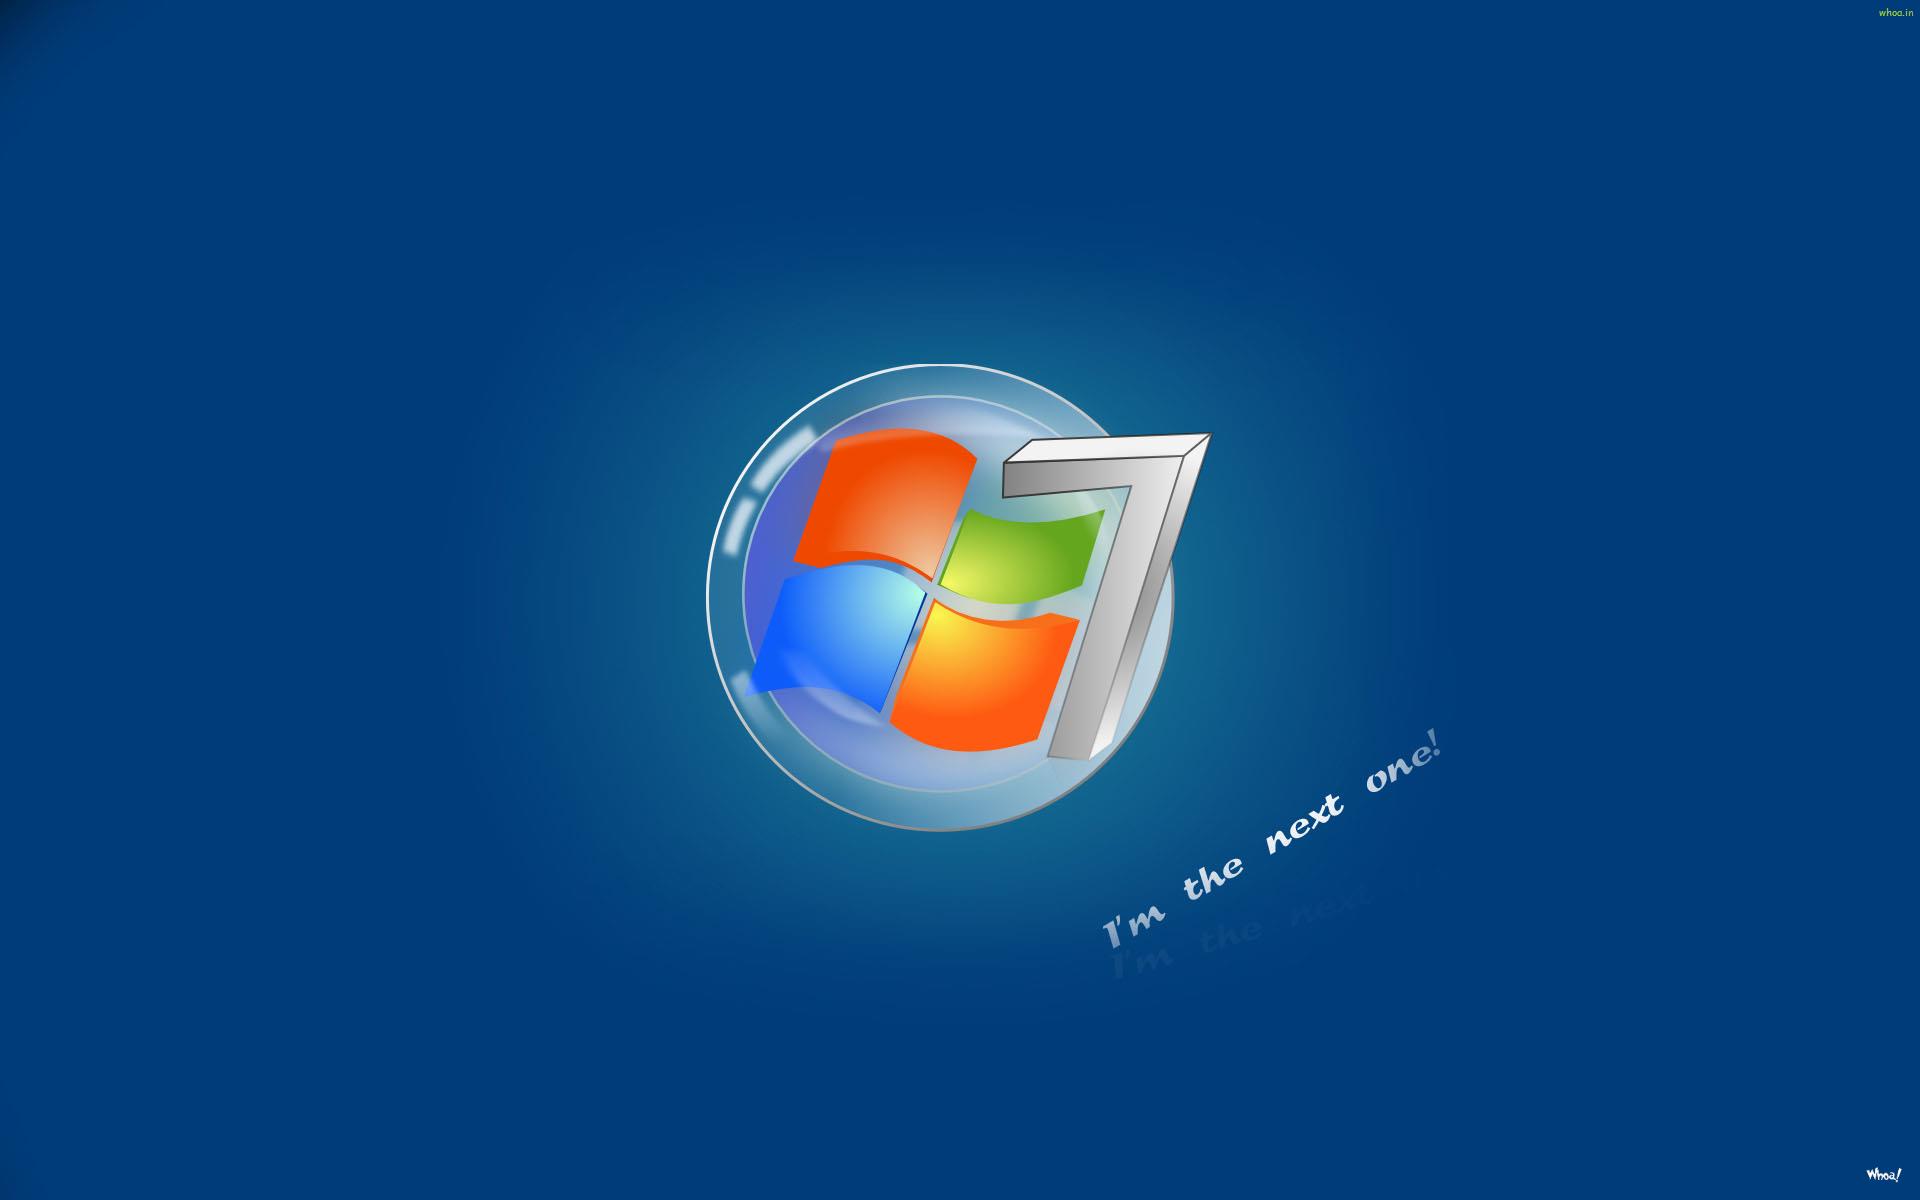 Windows 7 Old Type Wallpapers